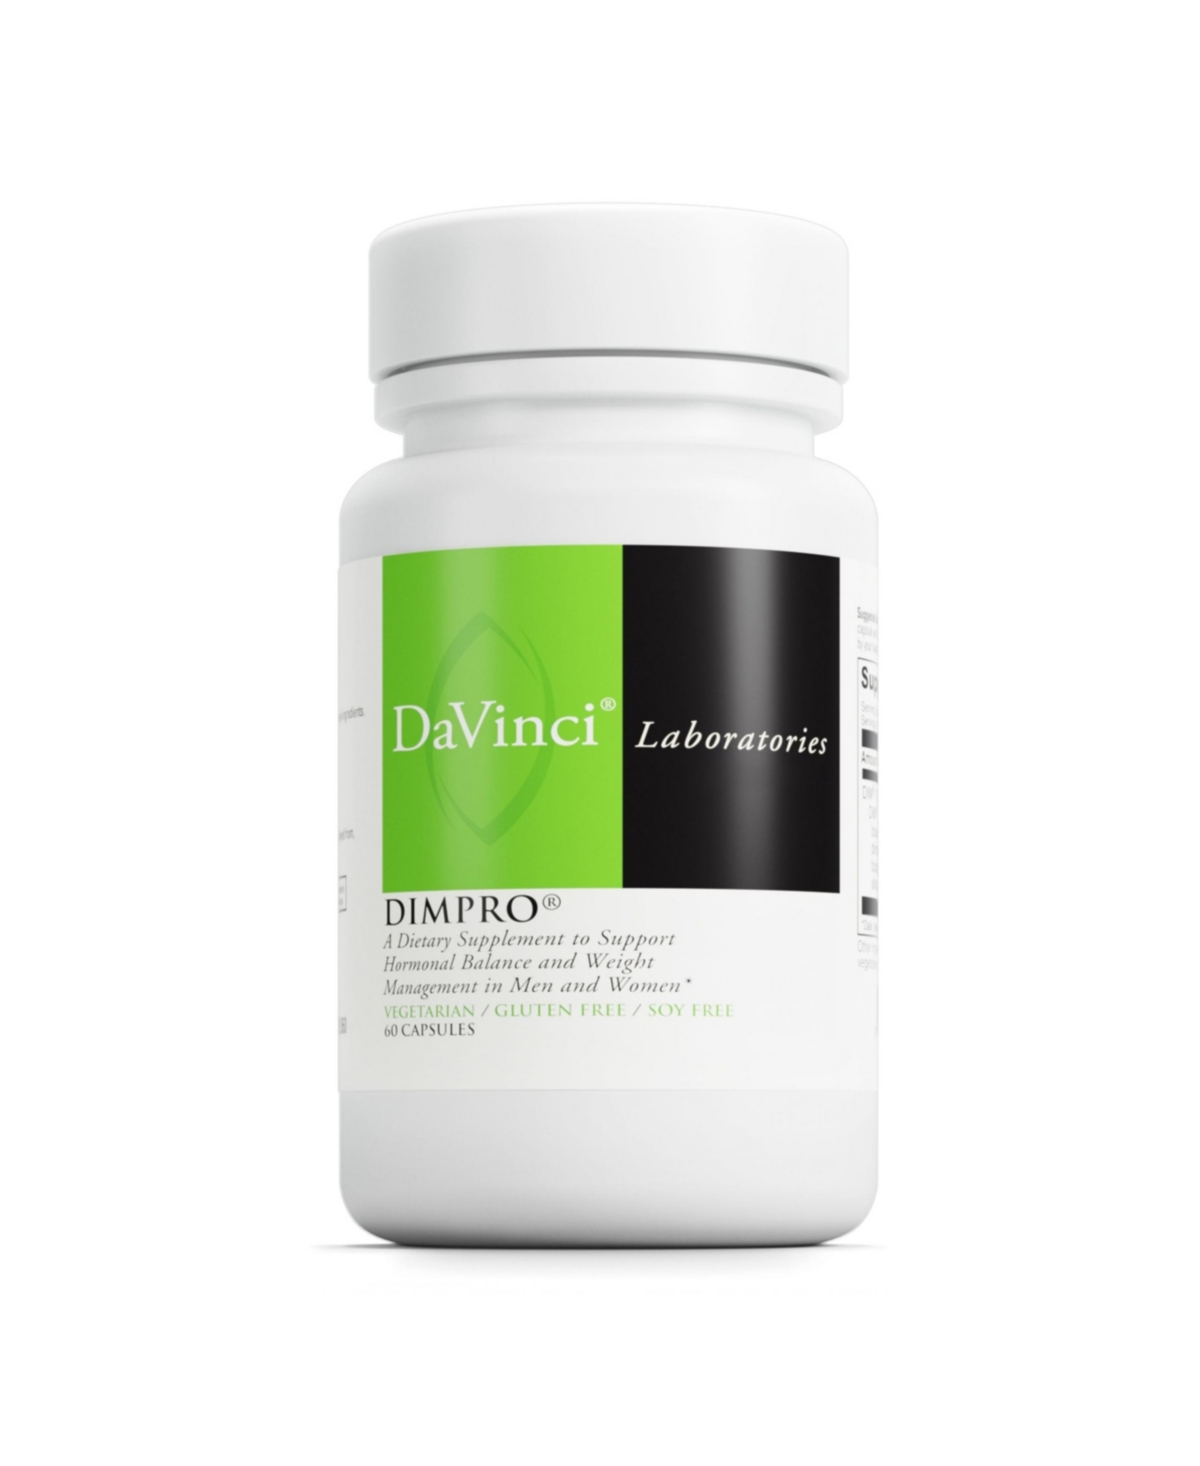 DaVinci Labs DimPro - Dietary Supplement to Support Hormonal Balance in Men & Women & Healthy Weight Management - With Vitamin E and More - Soy-Free -